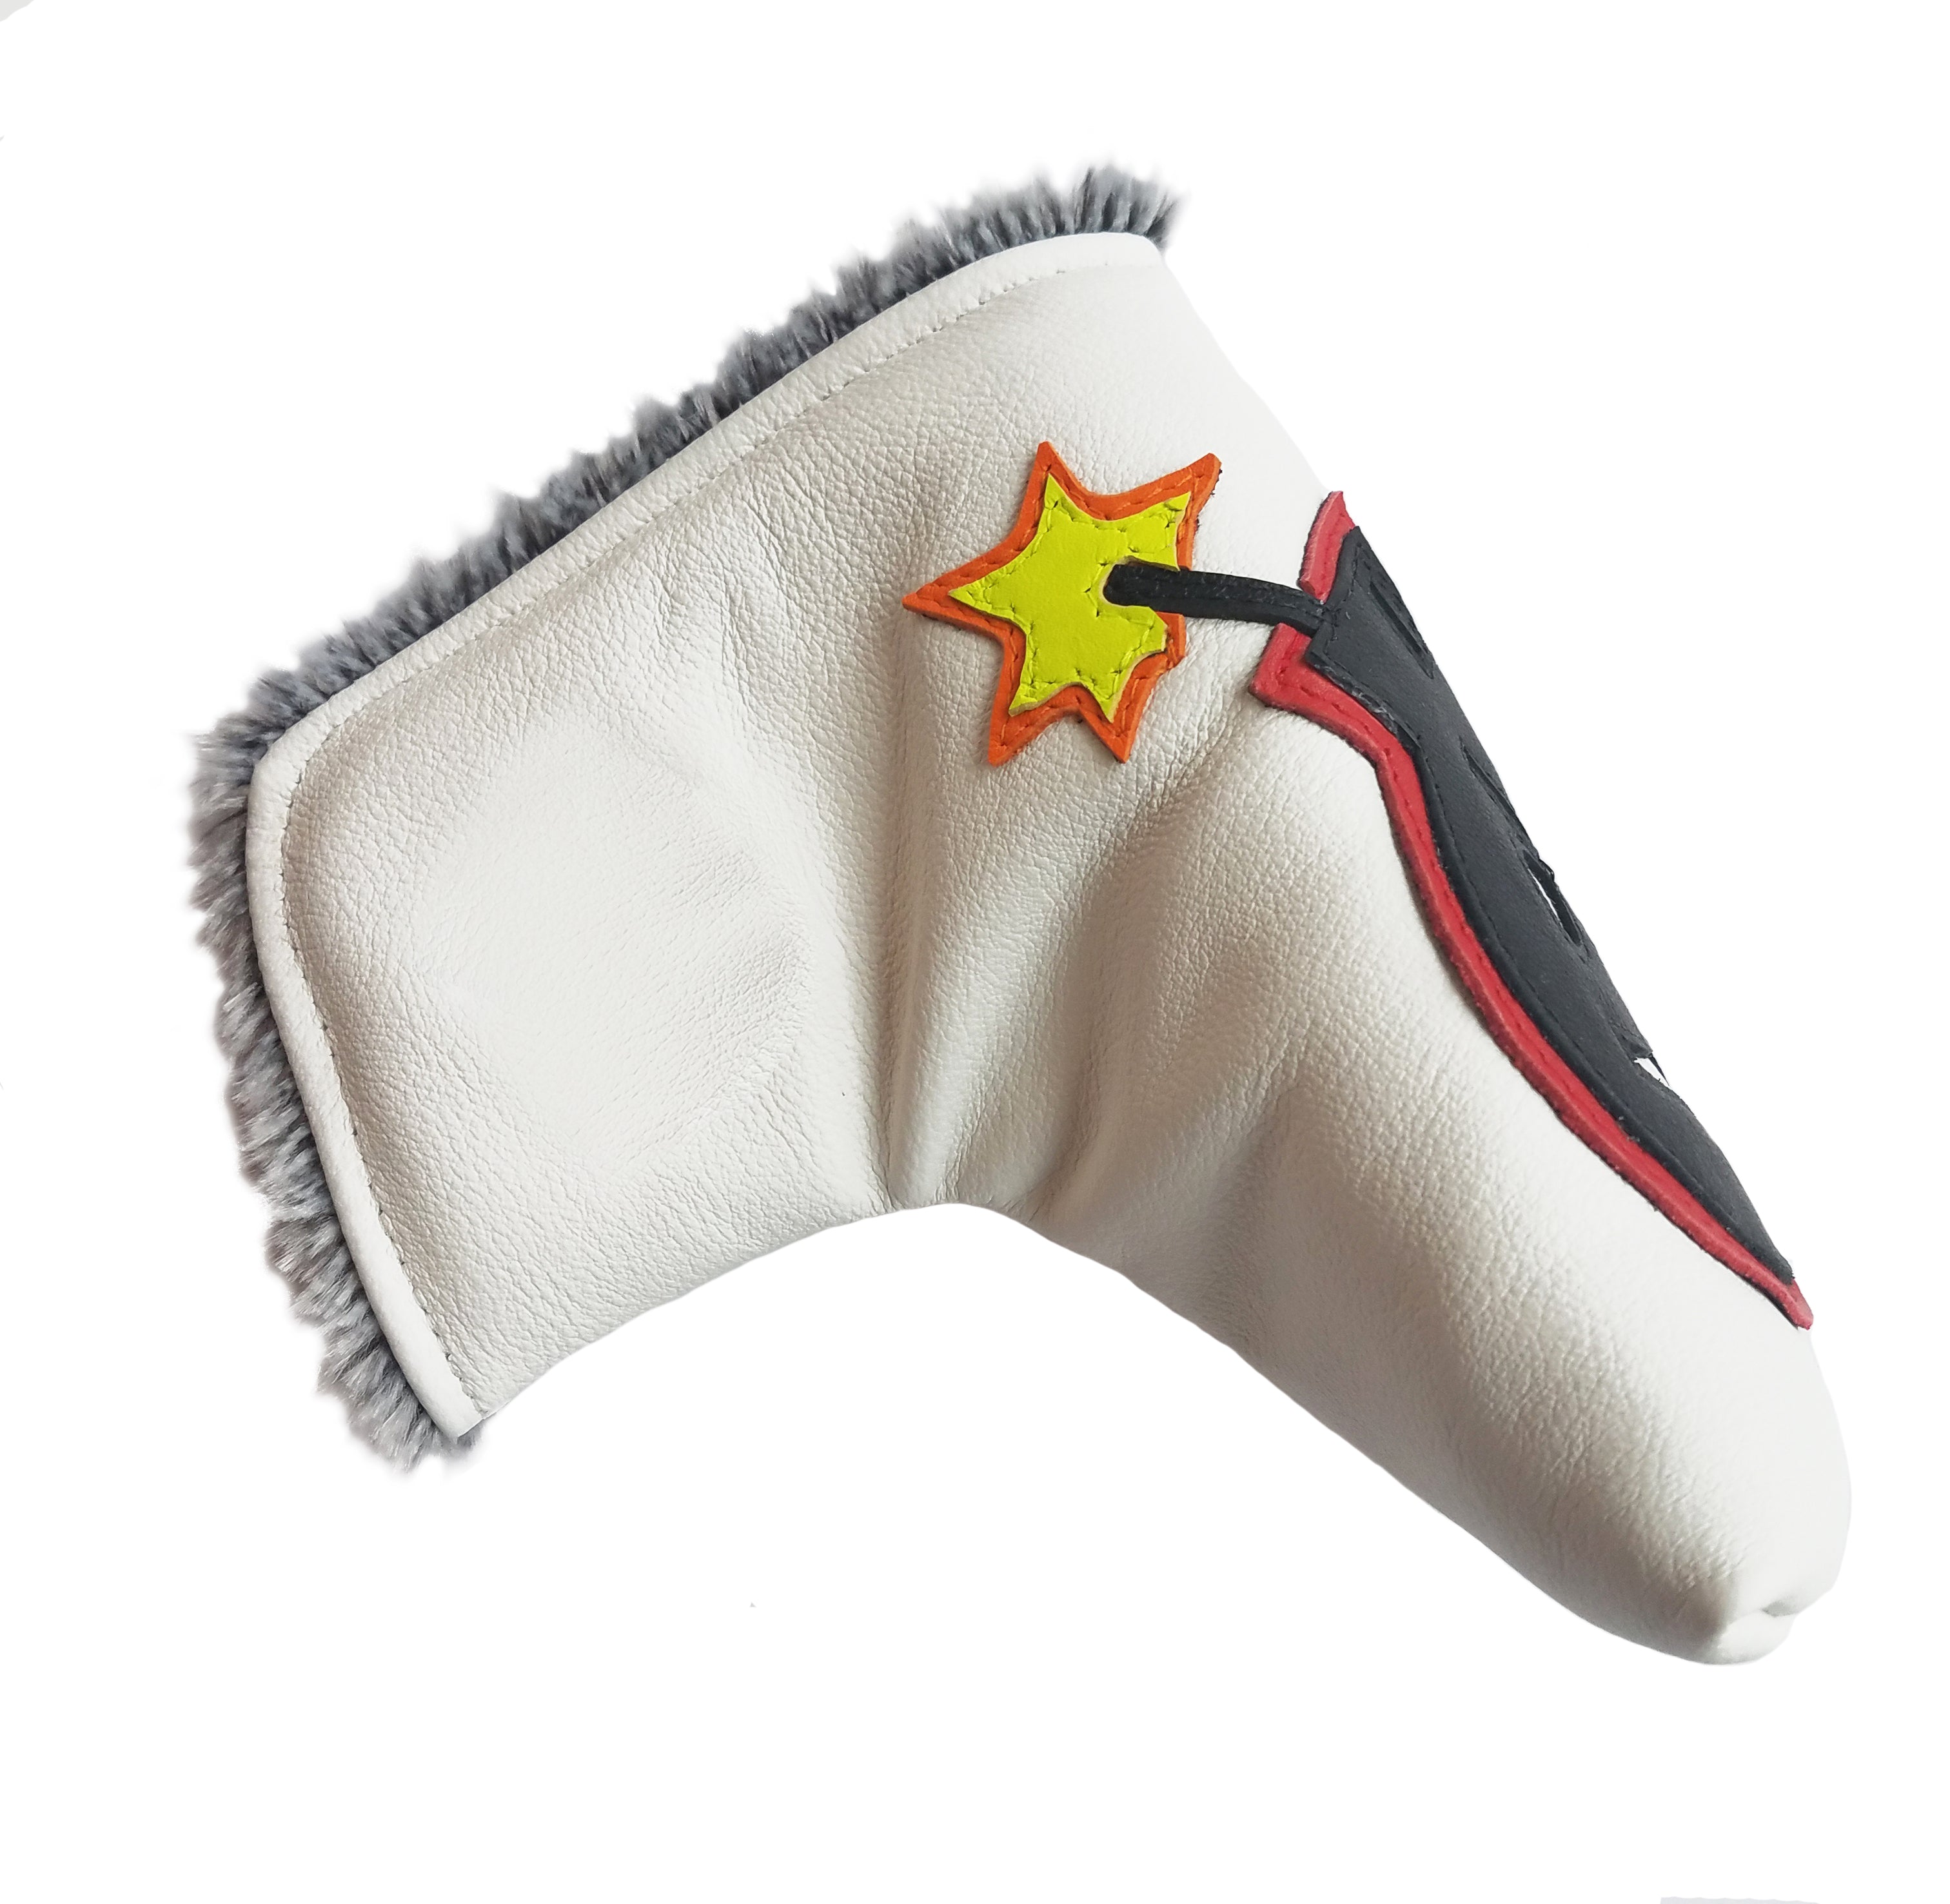 NEW! The "Angry Bomb" Putter Cover - Robert Mark Golf